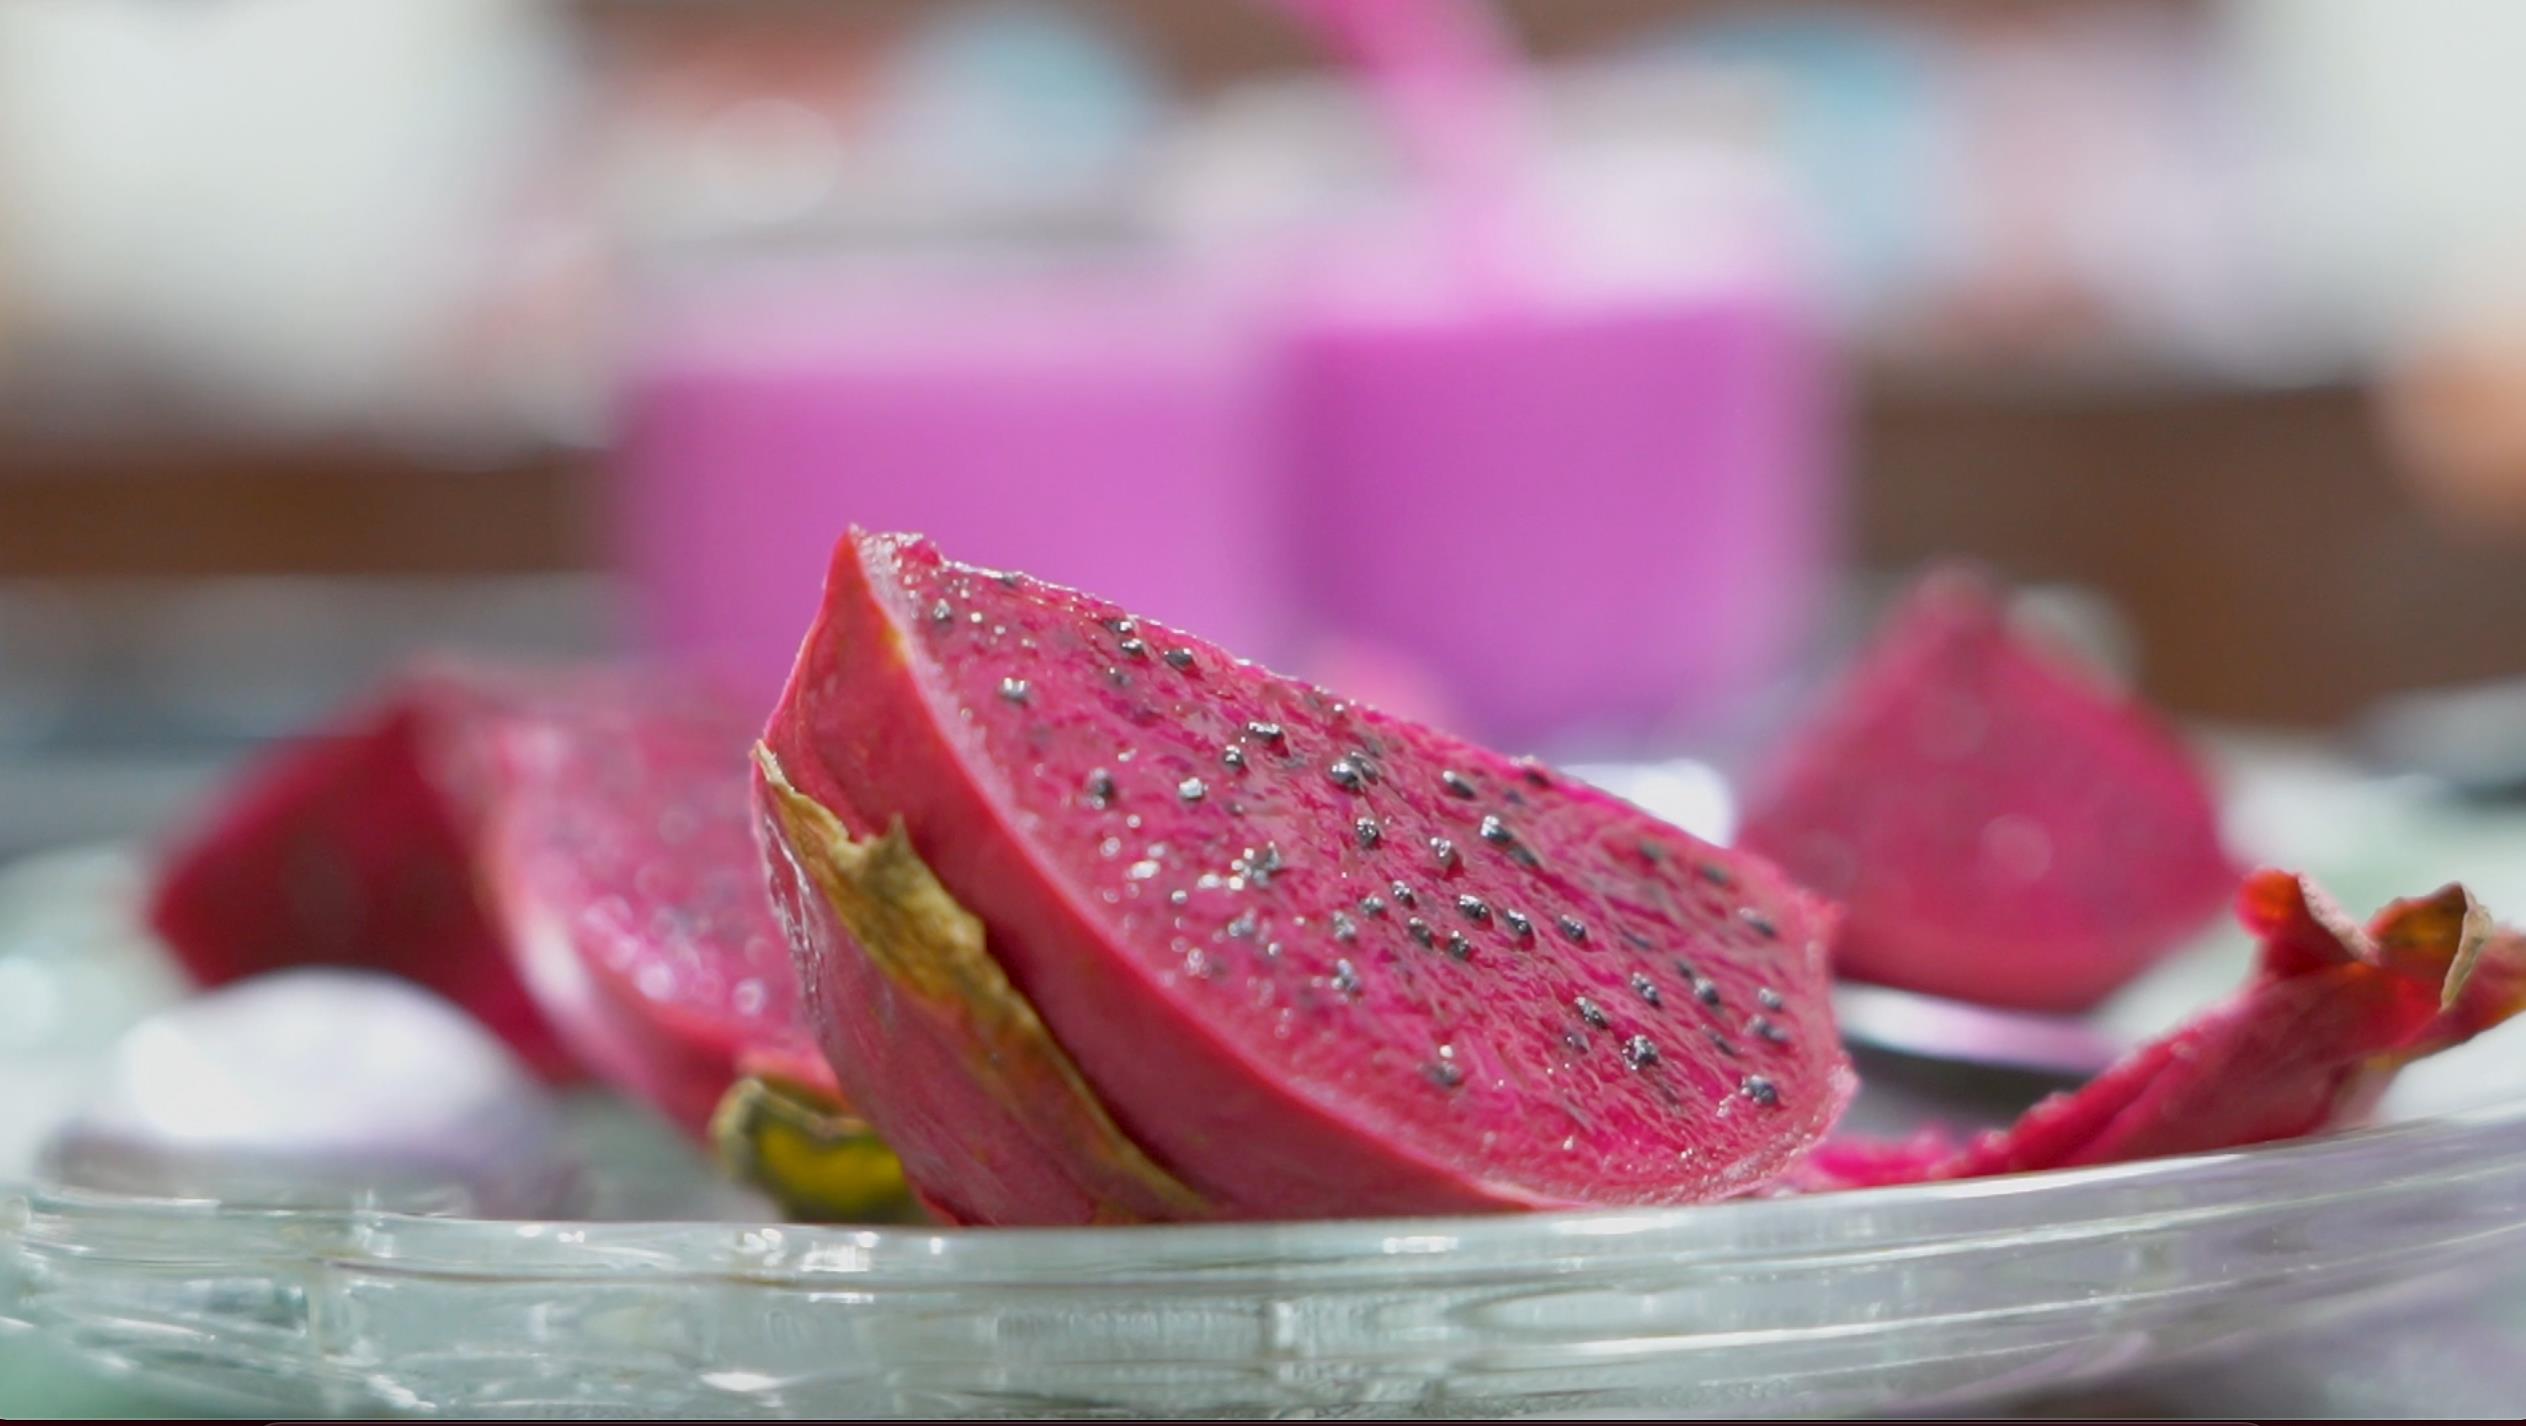 Chinese technology bolsters Pakistan’s dragon fruit growth